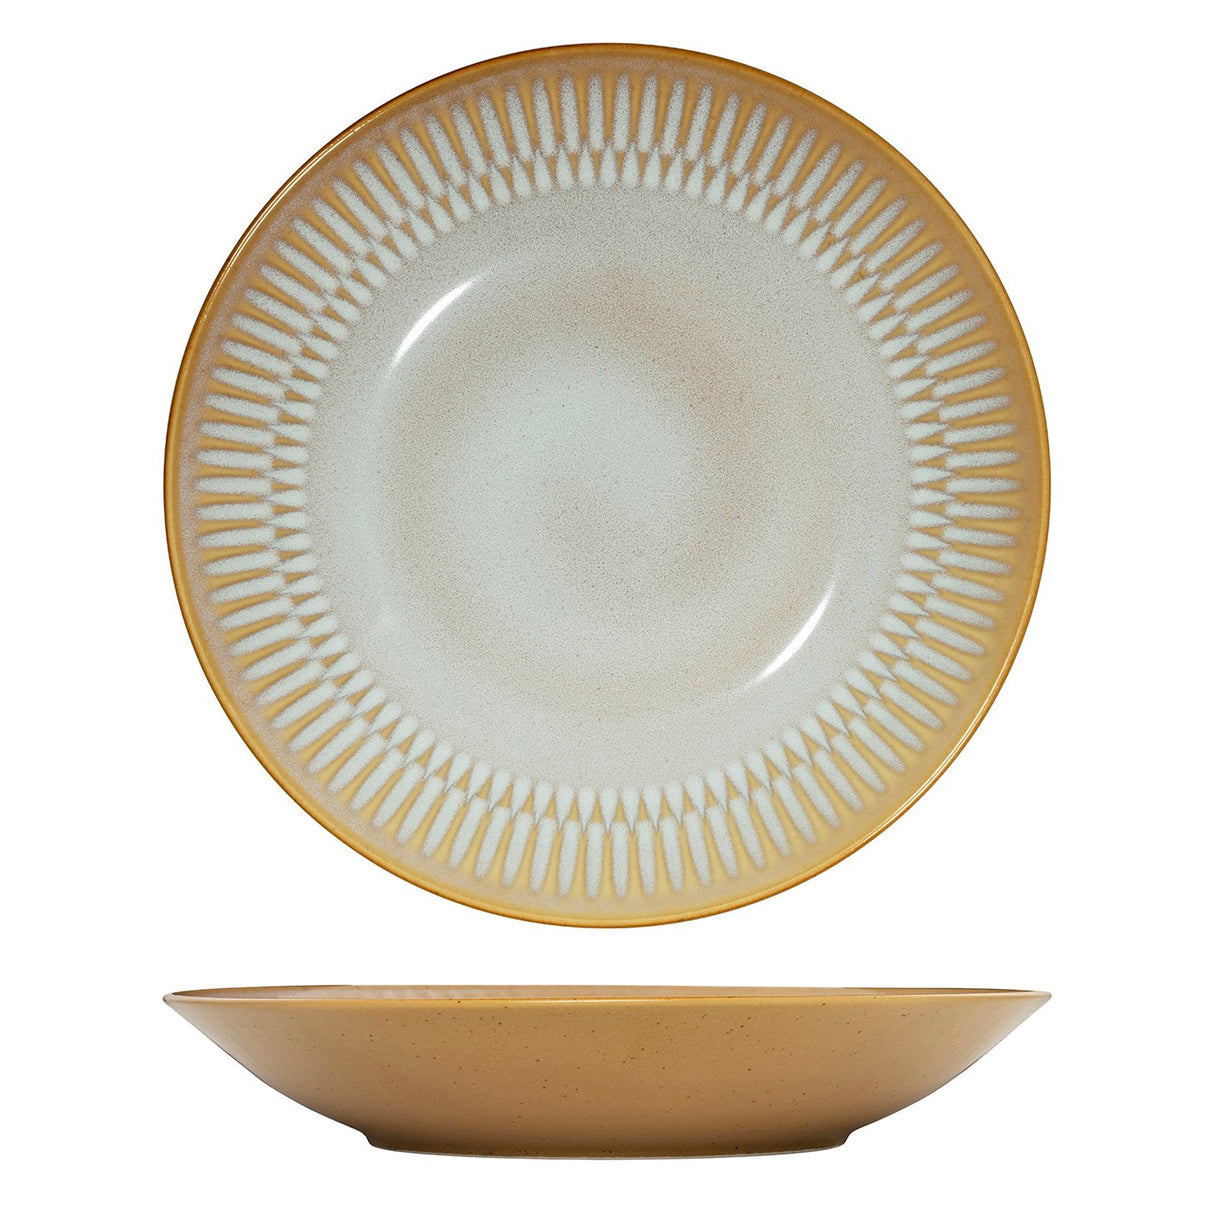 Round Deep Bowl/Plate - 280Mm, Almond from Luzerne. Textured, made out of Ceramic and sold in boxes of 3. Hospitality quality at wholesale price with The Flying Fork! 